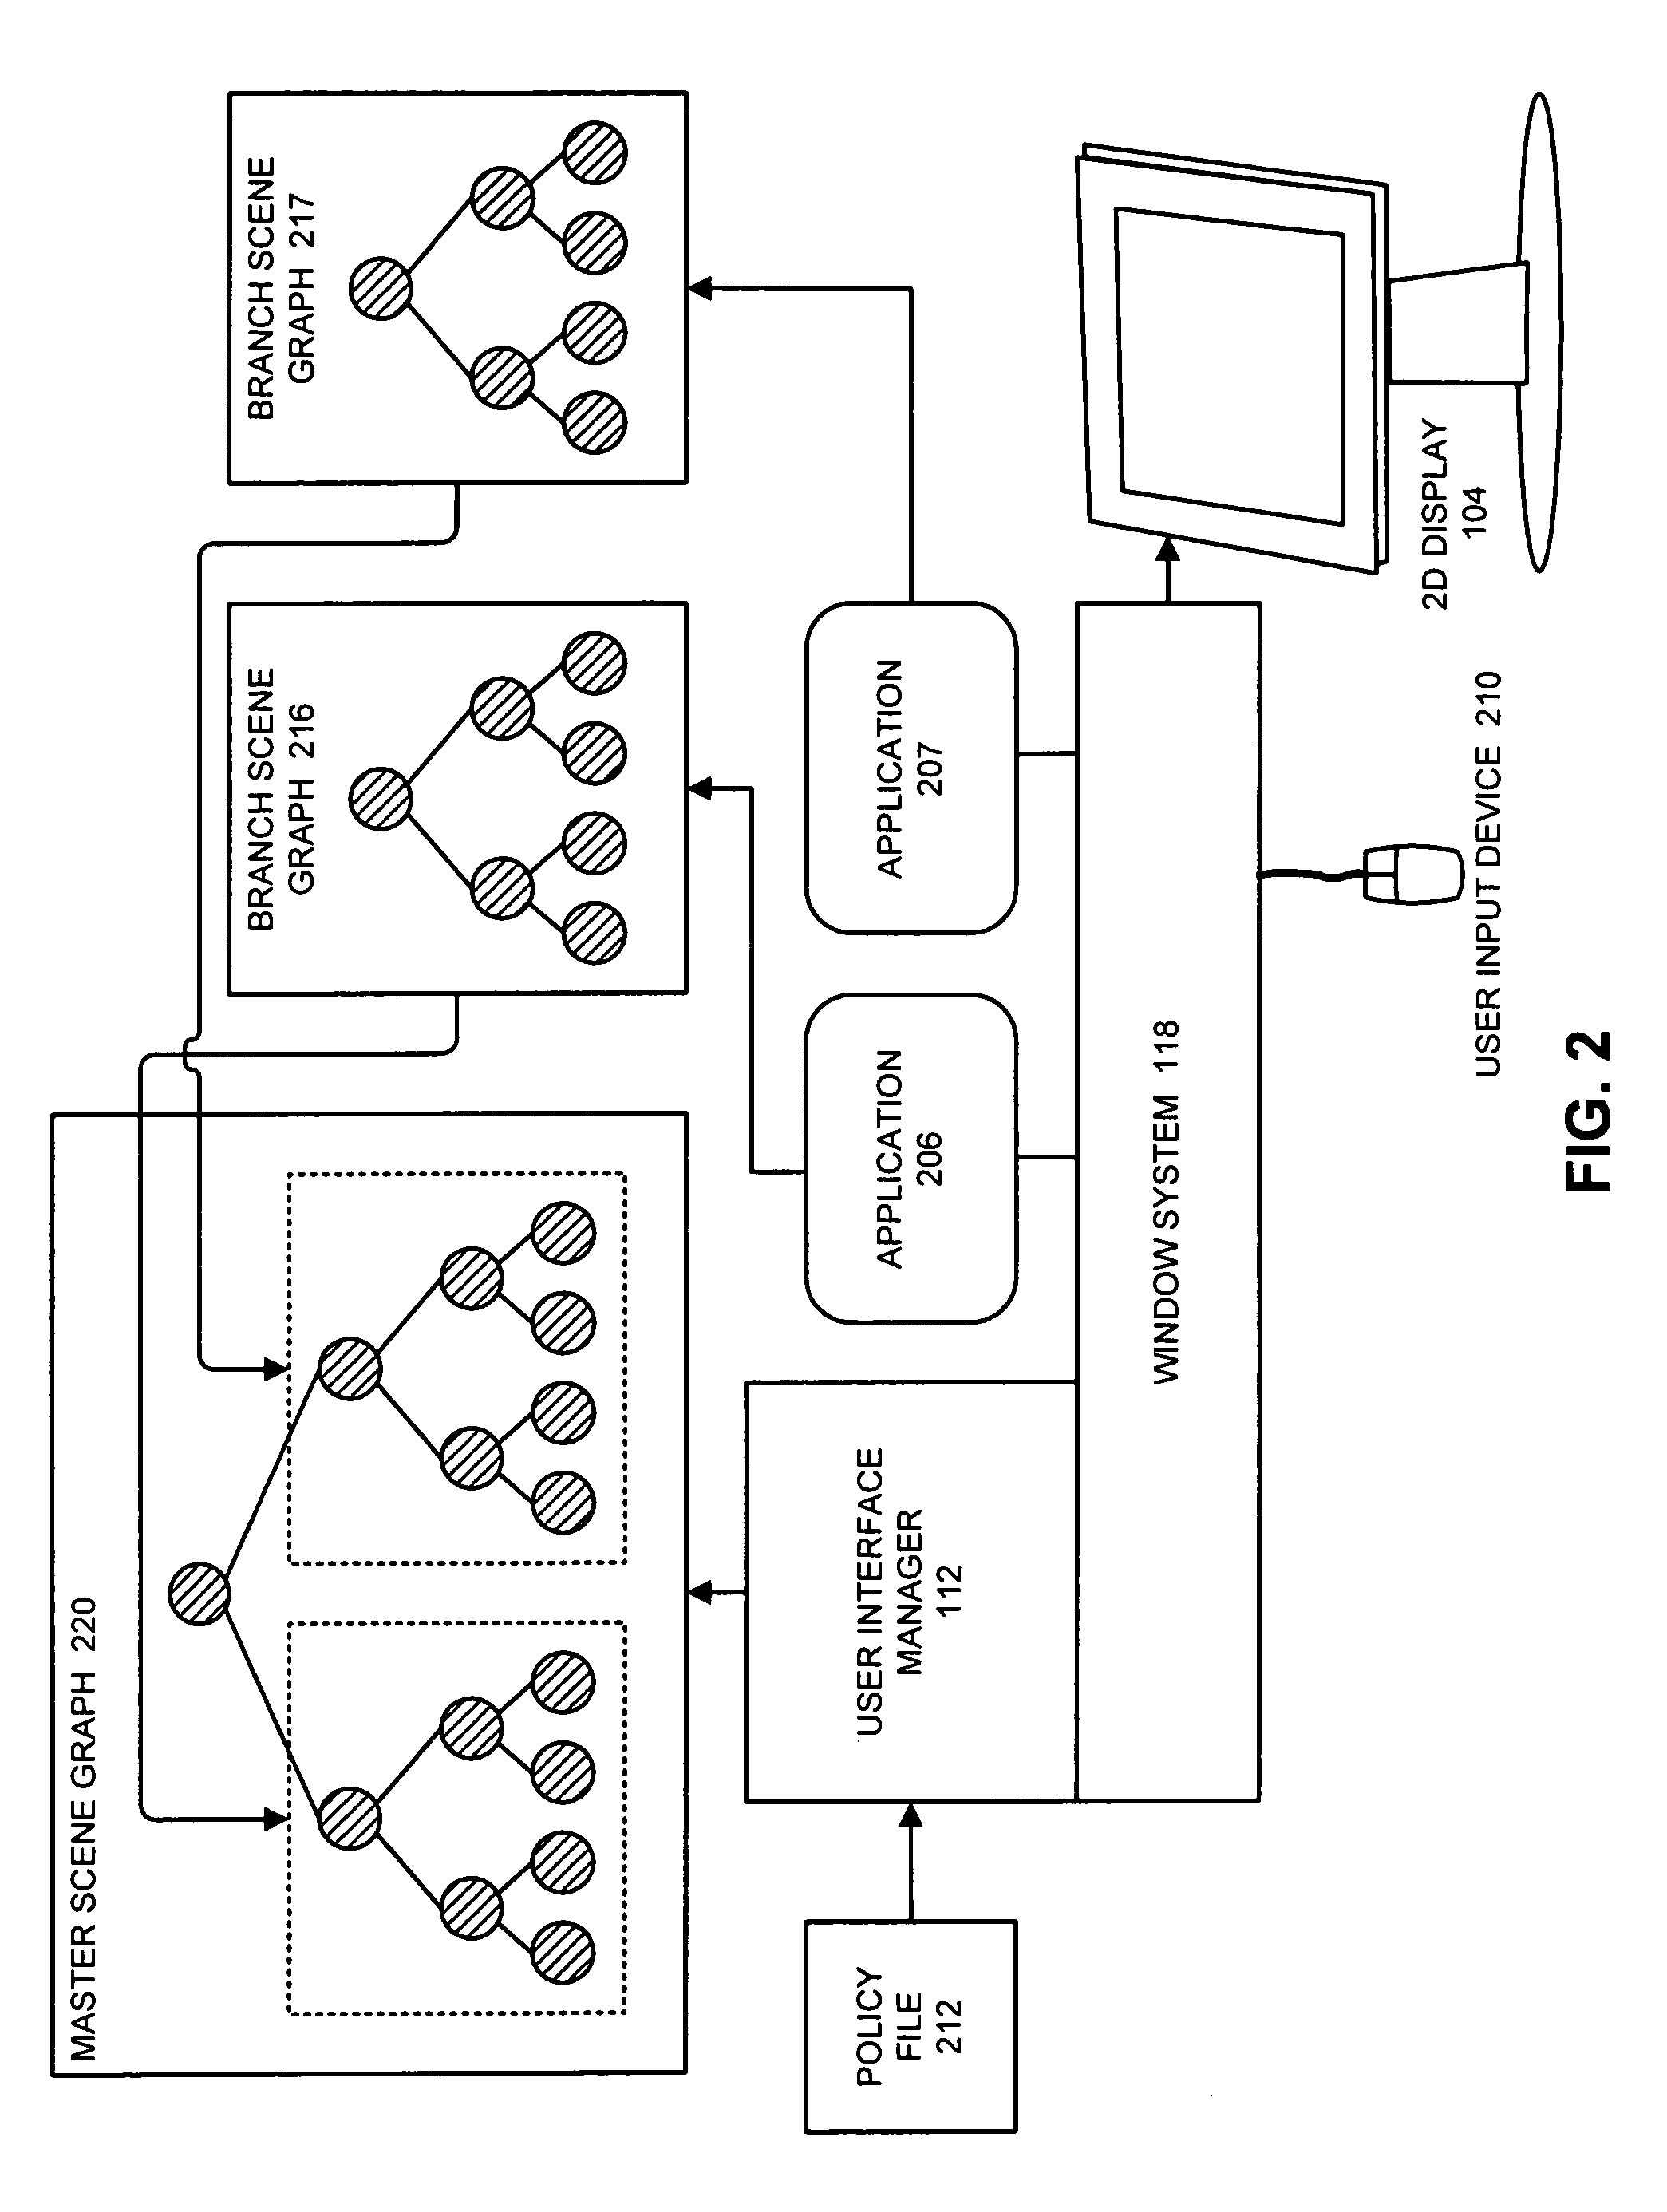 Method and apparatus for implementing a scene-graph-aware user interface manager